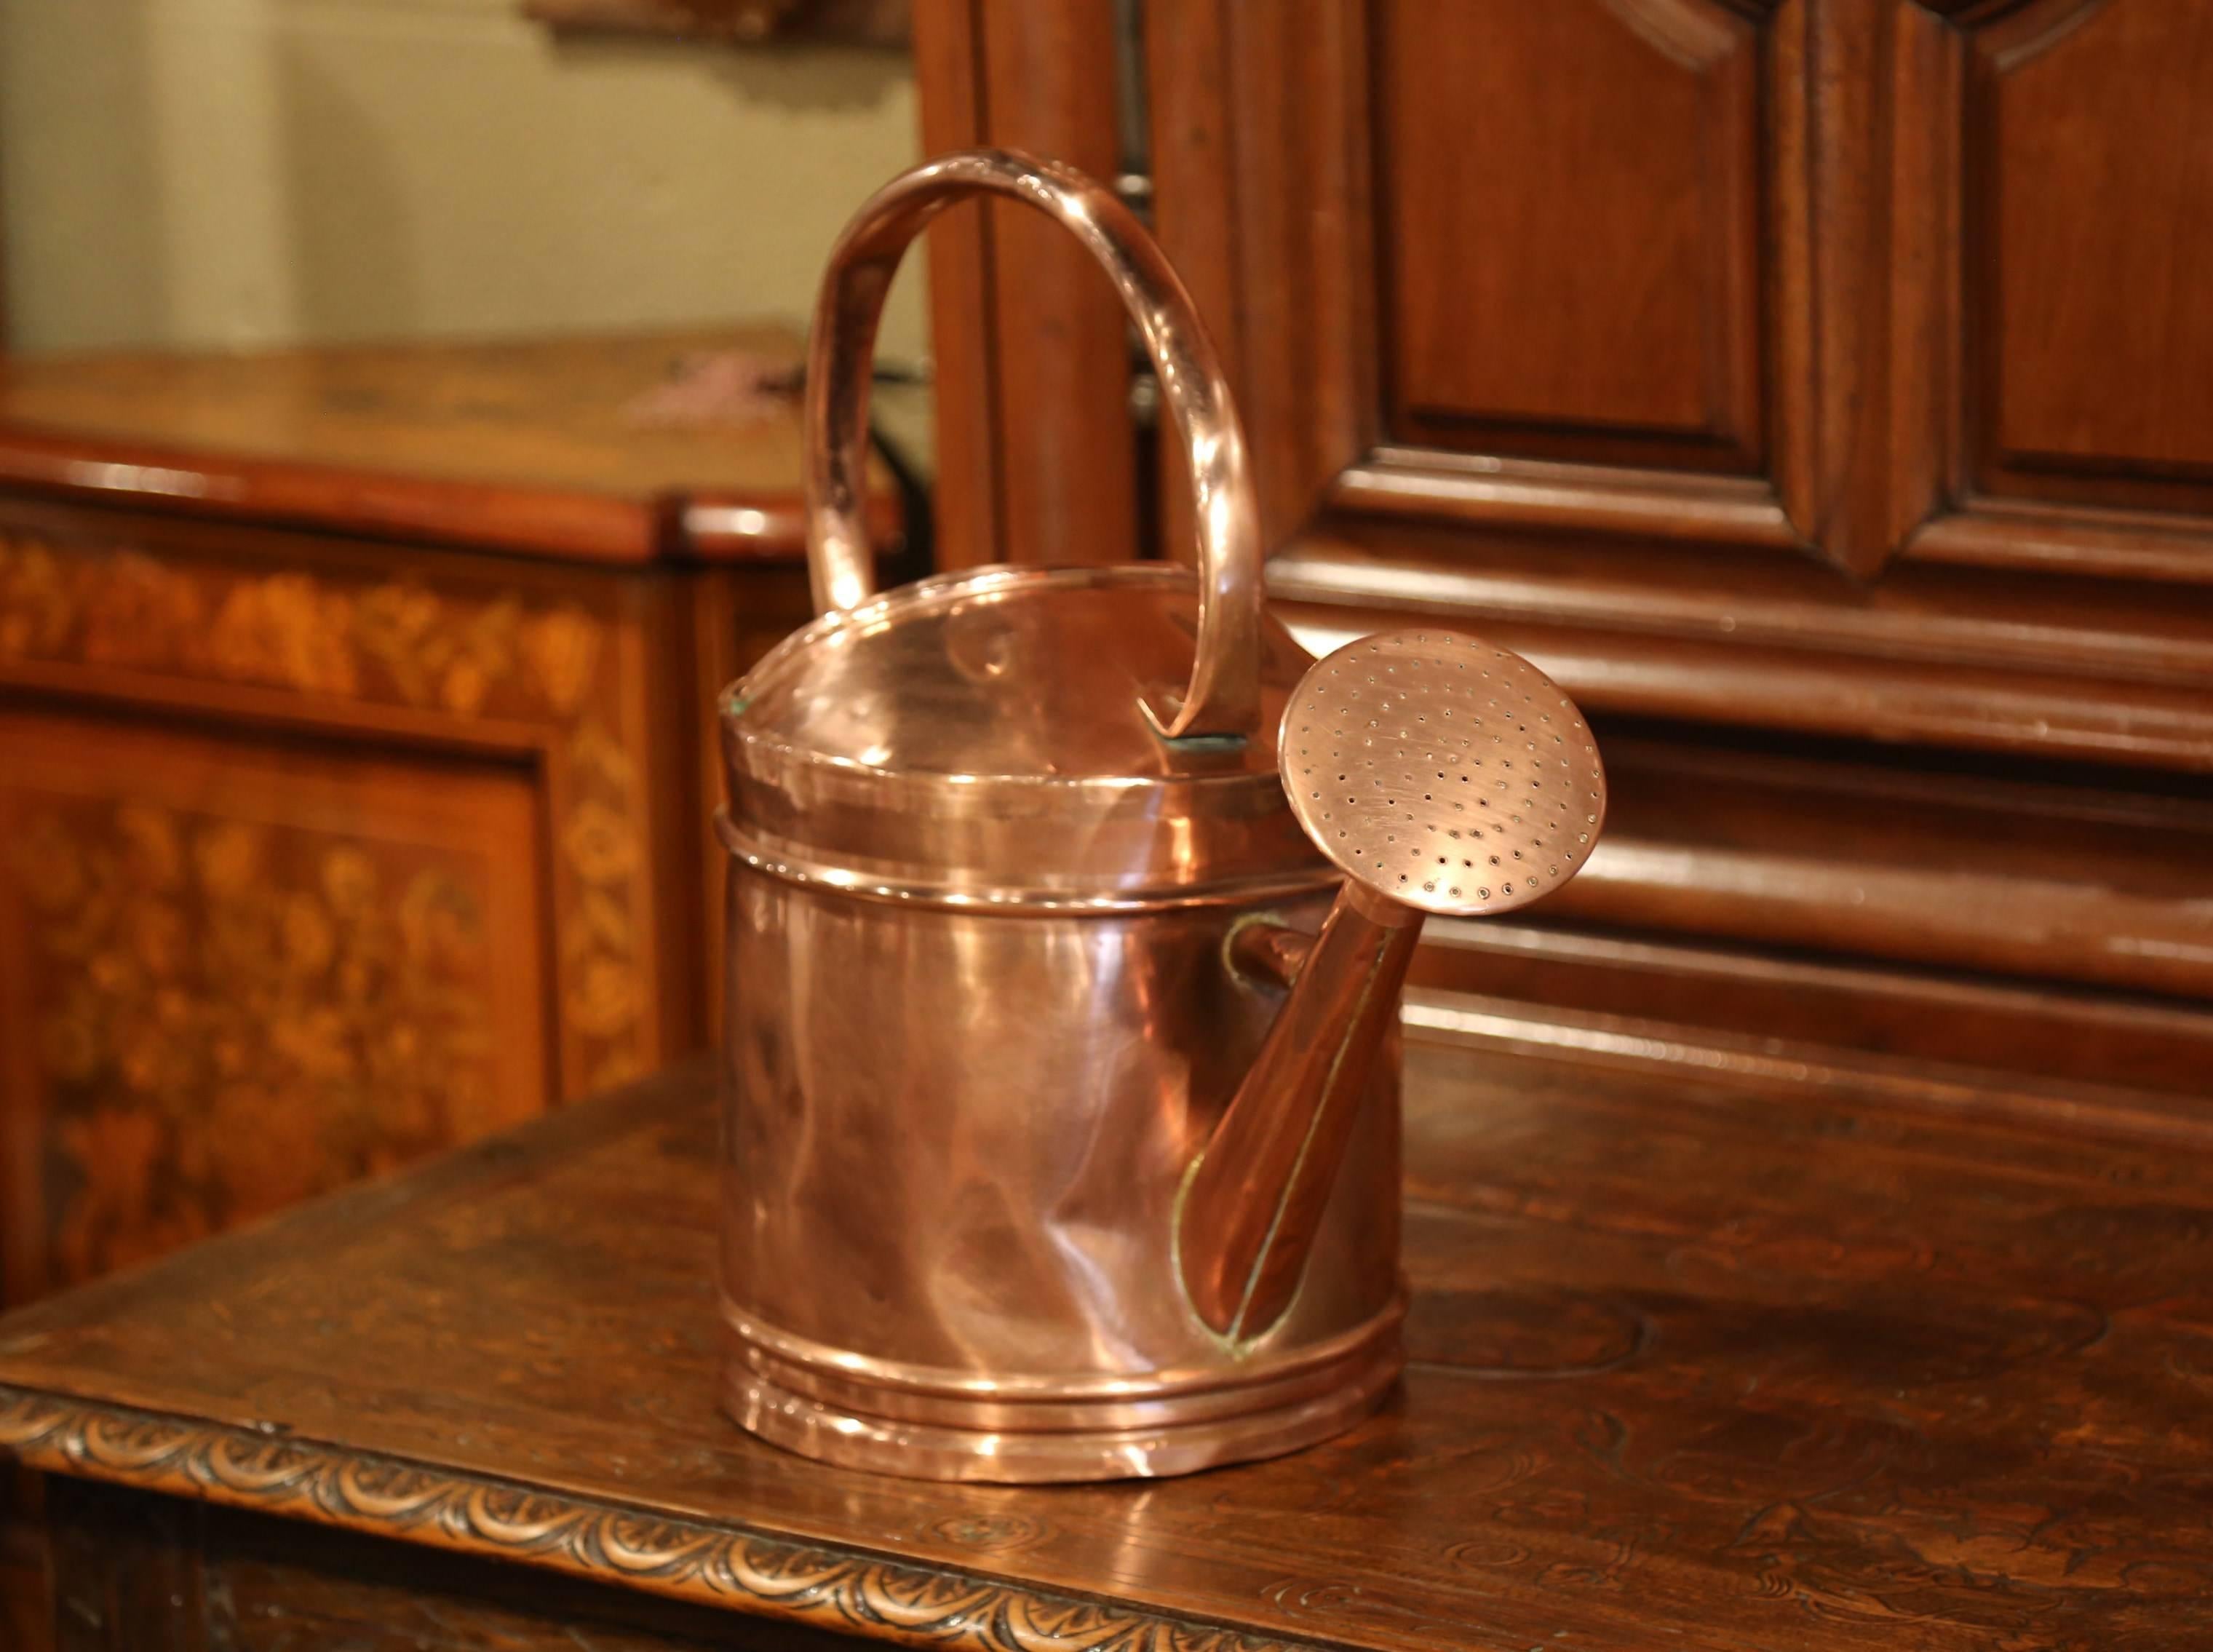 Water your plants elegantly with this antique copper watering can; crafted in France, circa 1860, the can features a removable spout and a large handle for easy use. The piece is in excellent condition with a rich patinated finish.
Measures: 19